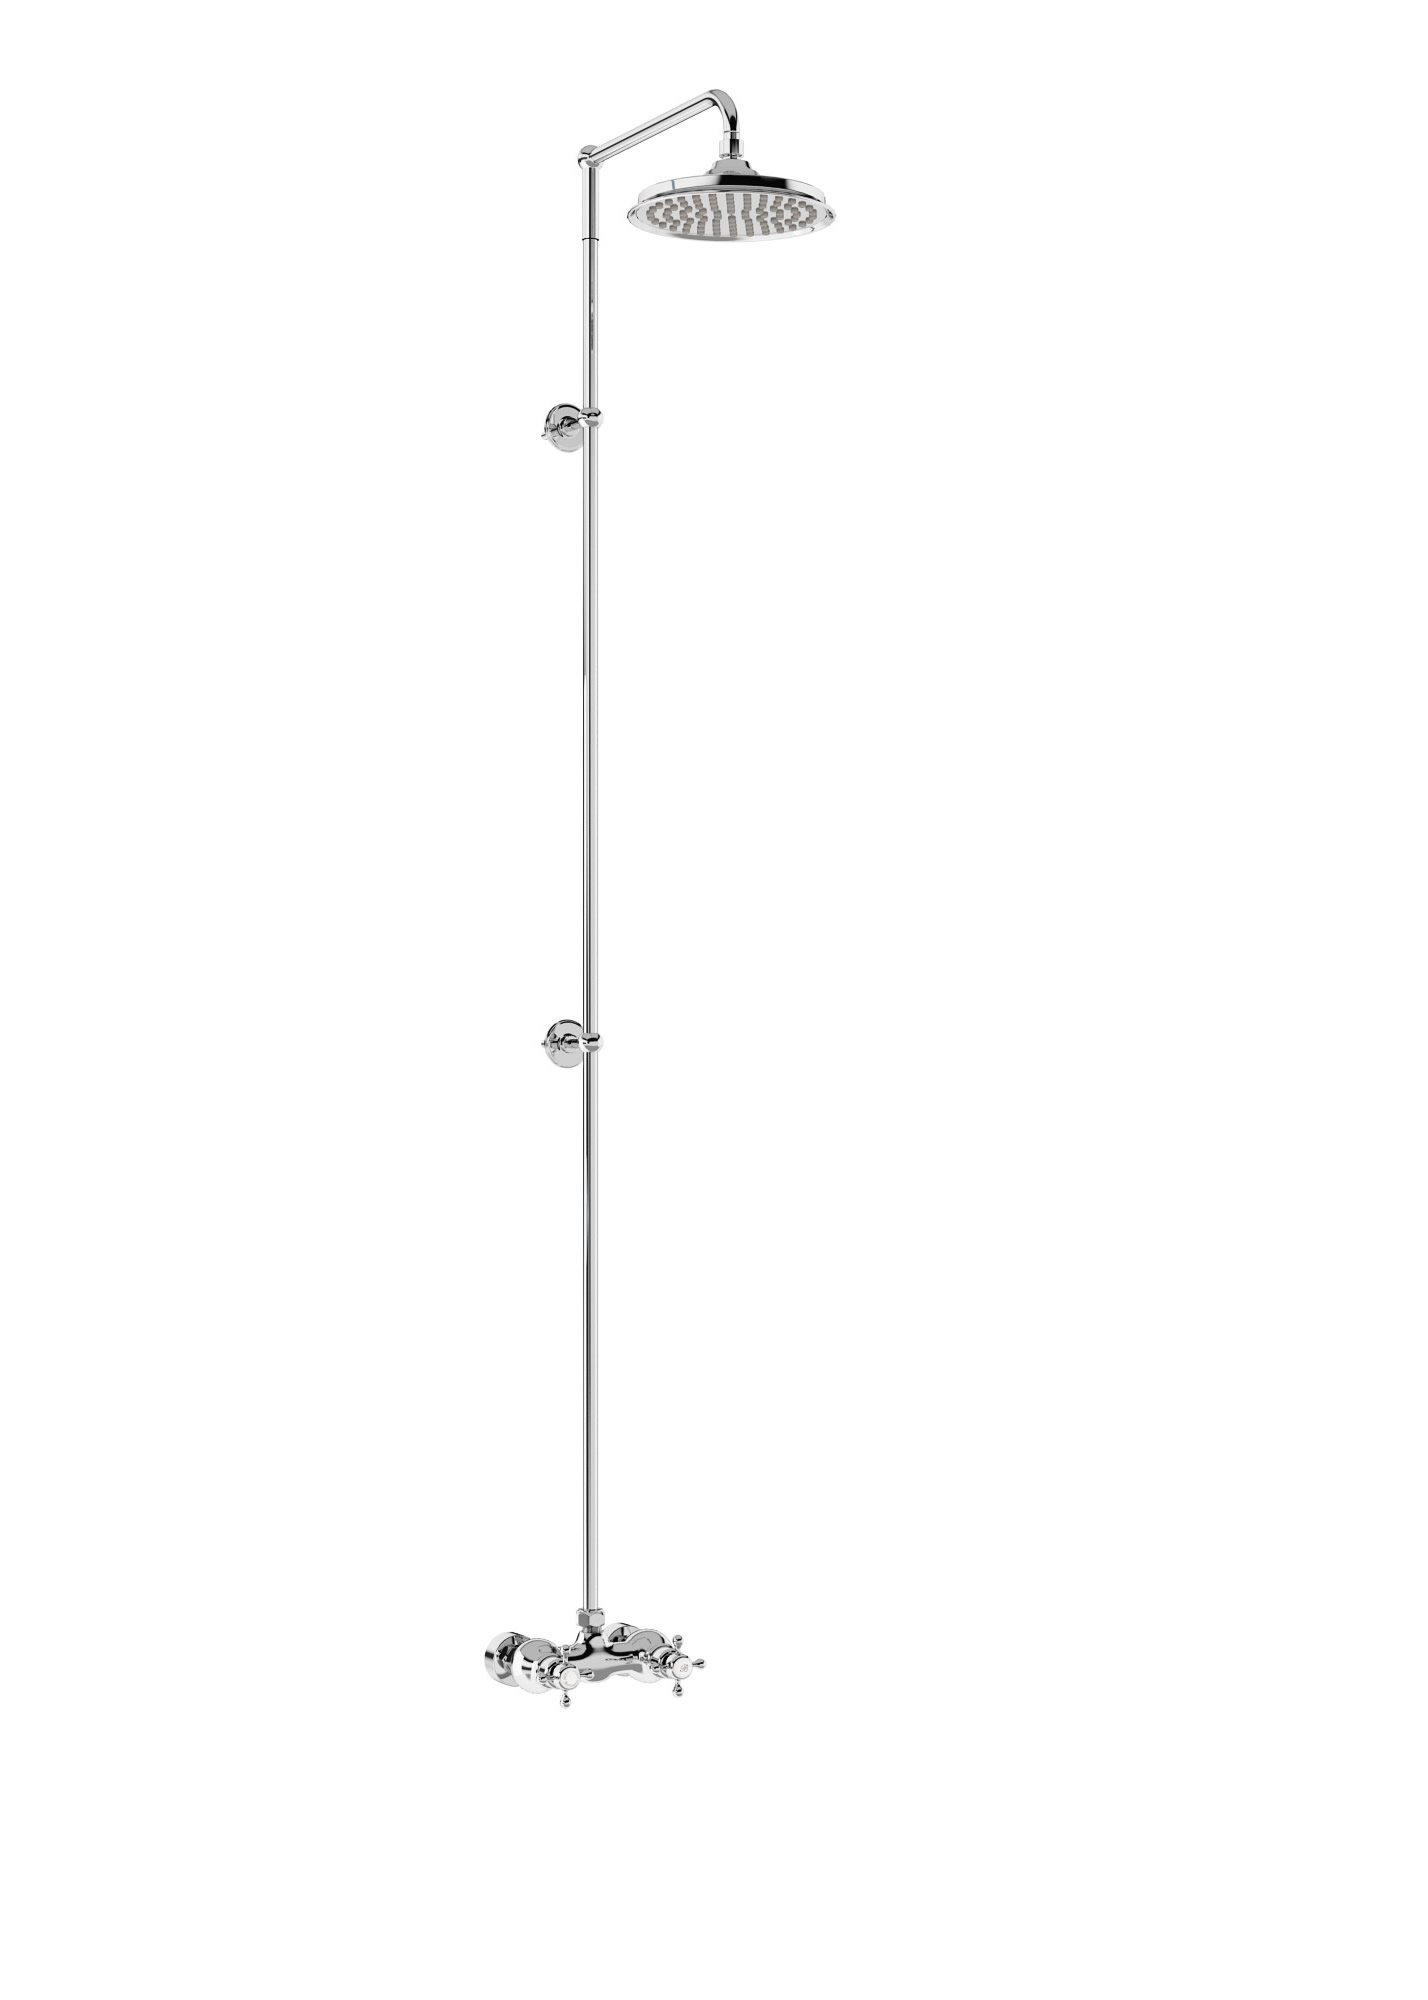 Eden Thermostatic Exposed Shower Bar Valve Single Outlet with Extended Rigid Riser and Swivel Shower Arm with 9 inch rose